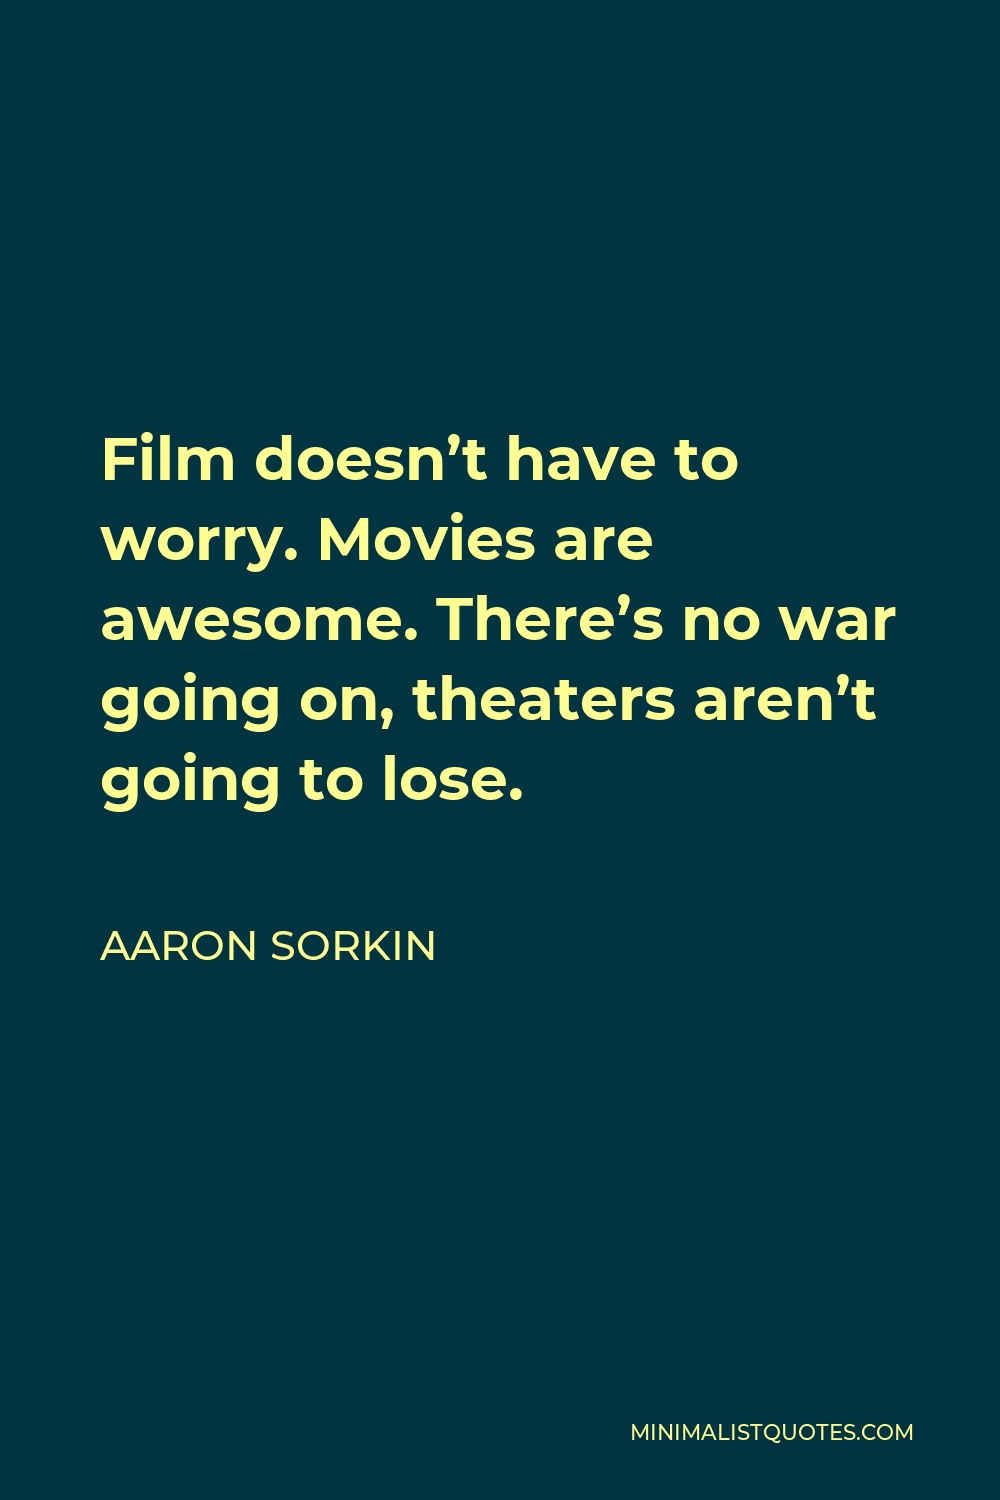 Aaron Sorkin Quote - Film doesn’t have to worry. Movies are awesome. There’s no war going on, theaters aren’t going to lose.